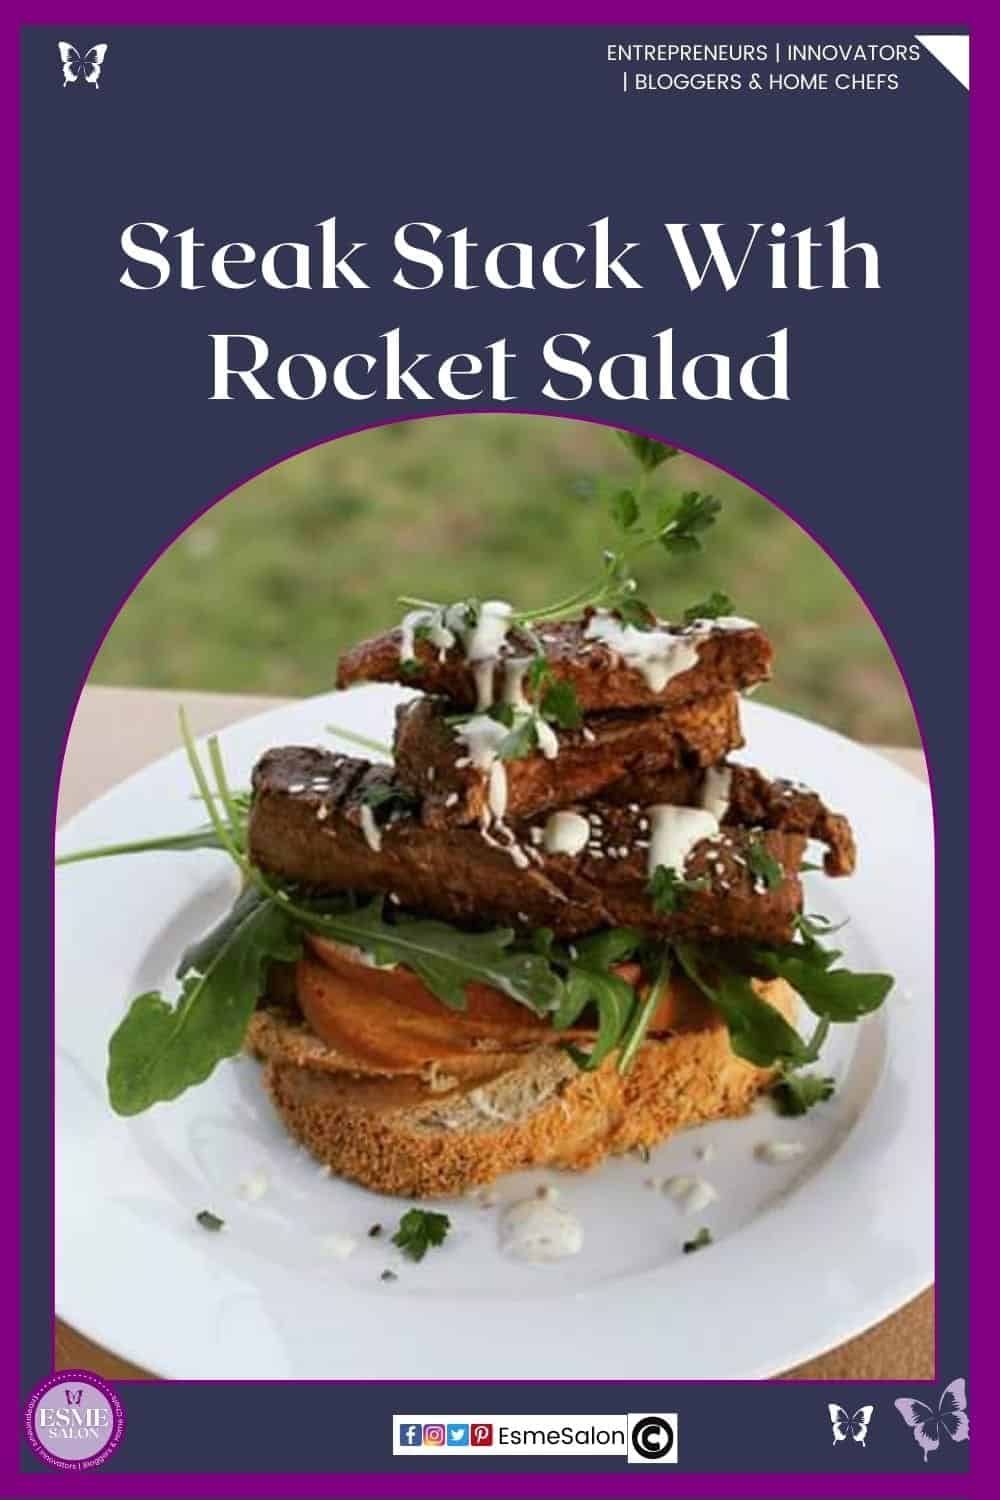 an image of a white plate with a slice of bread, rocket salad and slices of steak with a cream sauce